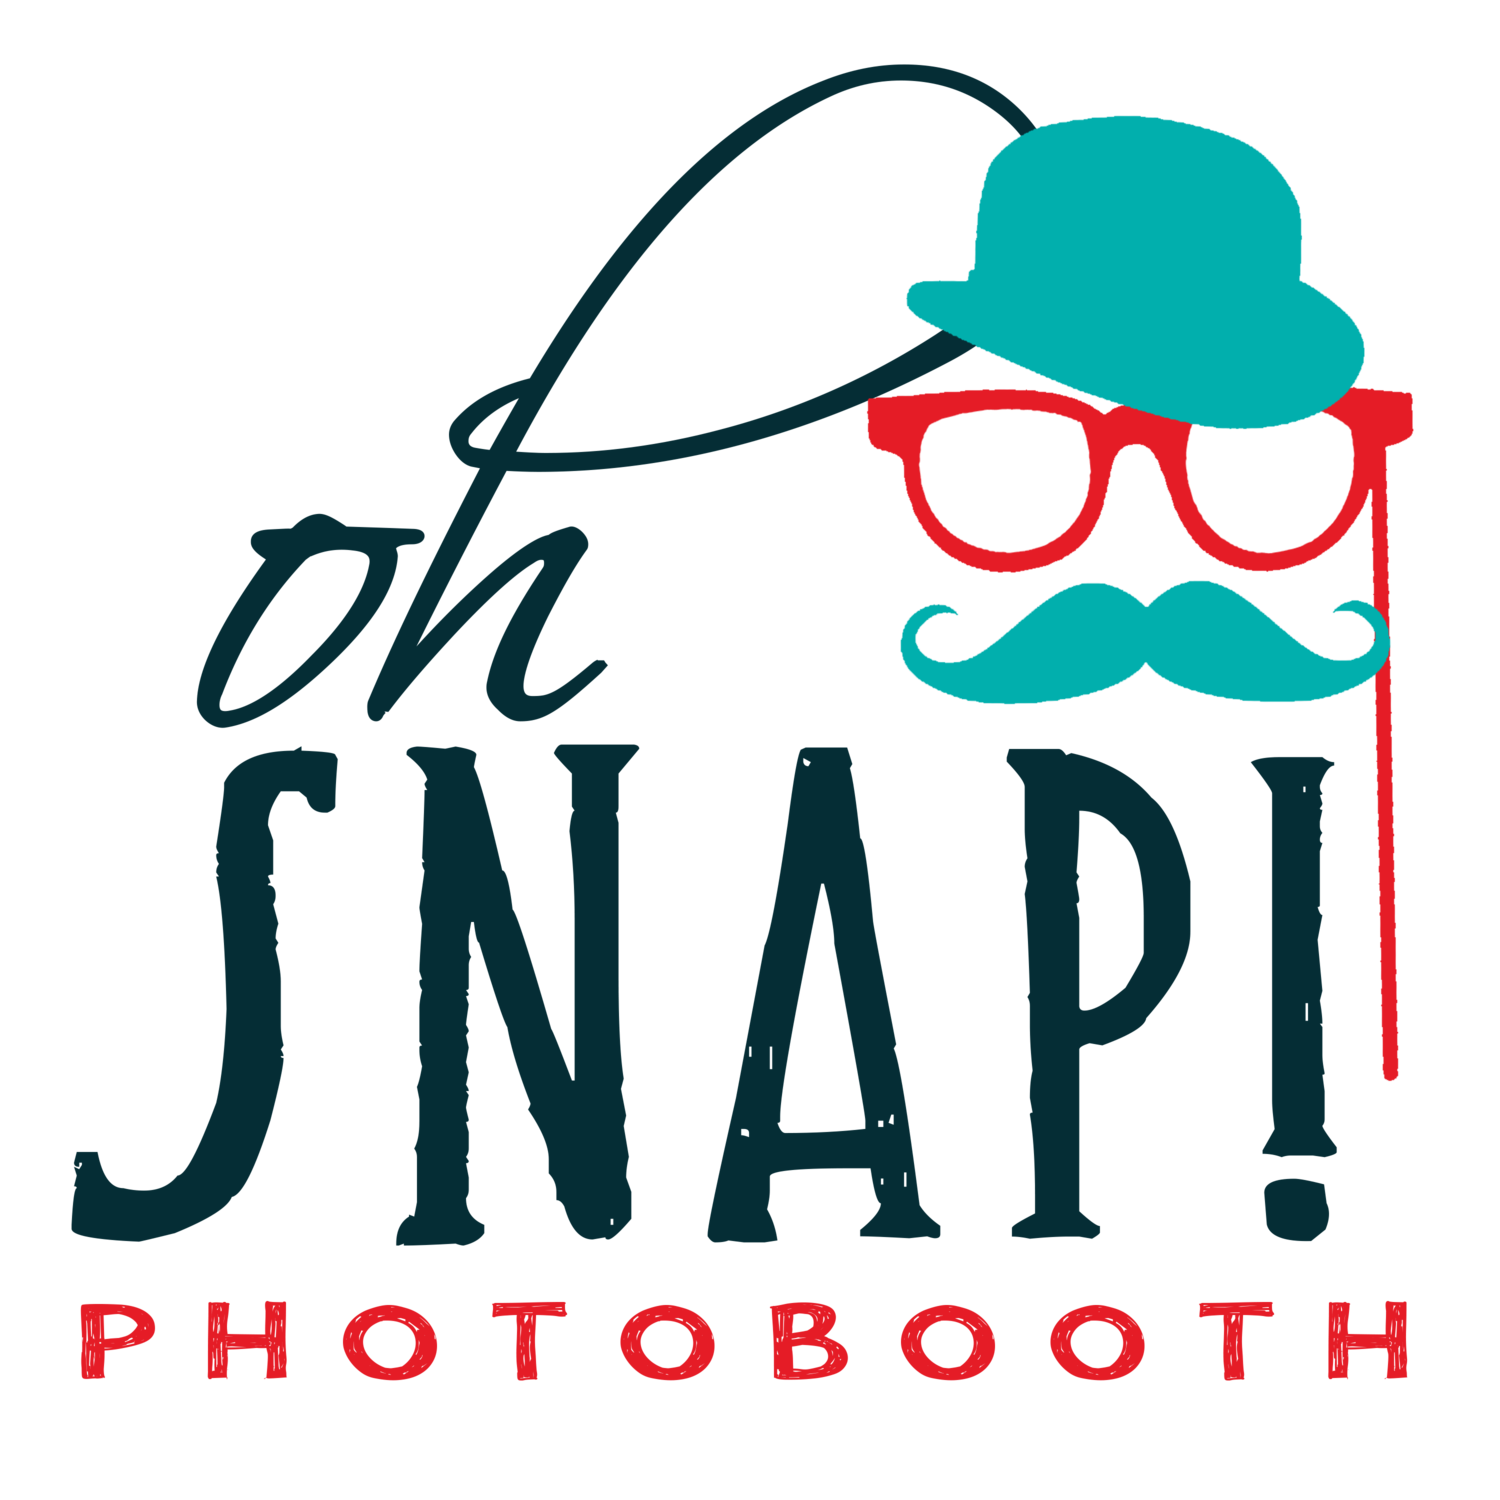 Photography clipart photobooth. Oh snap photo booth